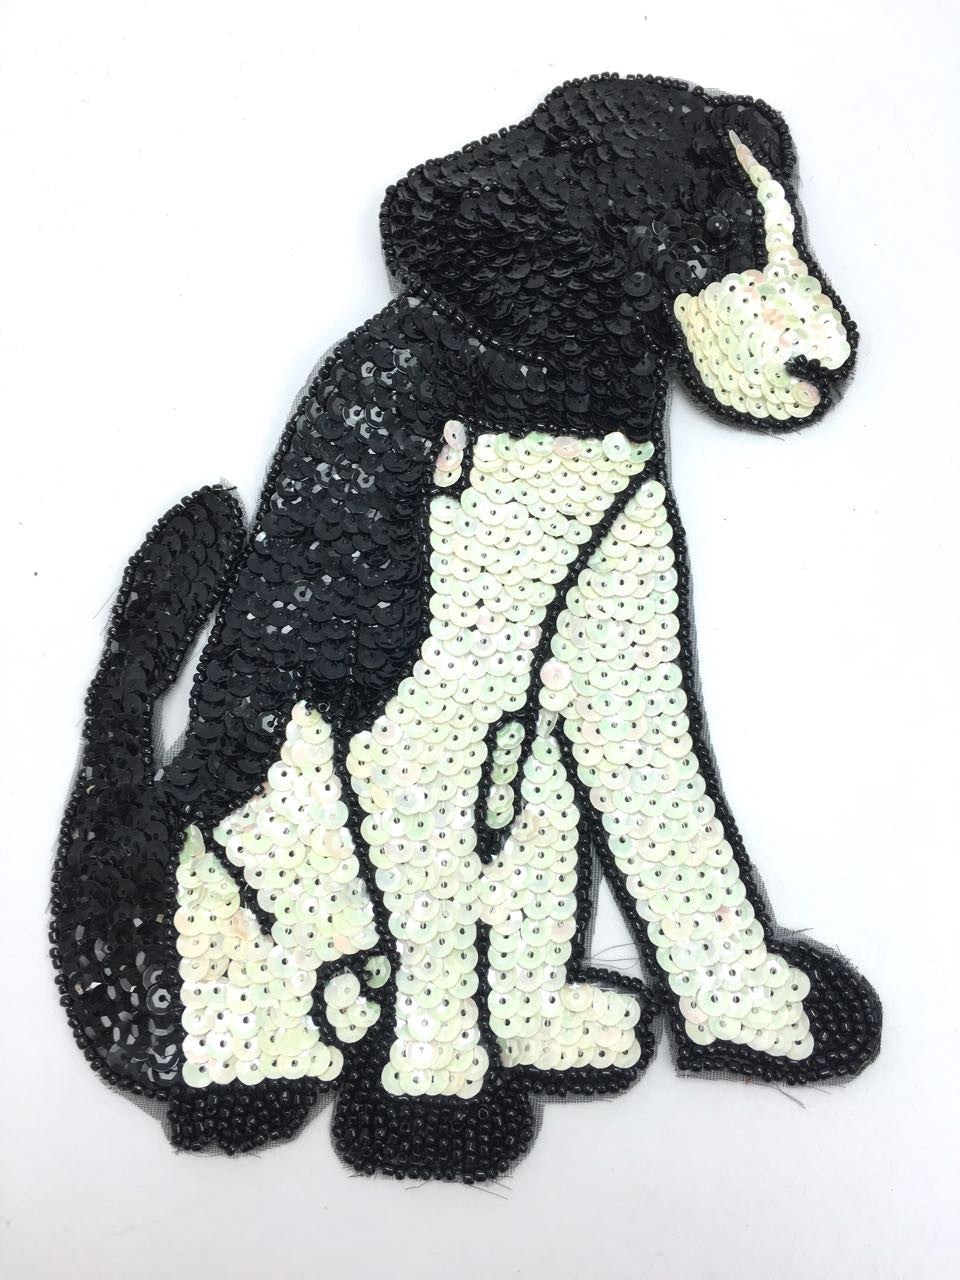 Dog Sitting with Black and White Sequins and Beads 8